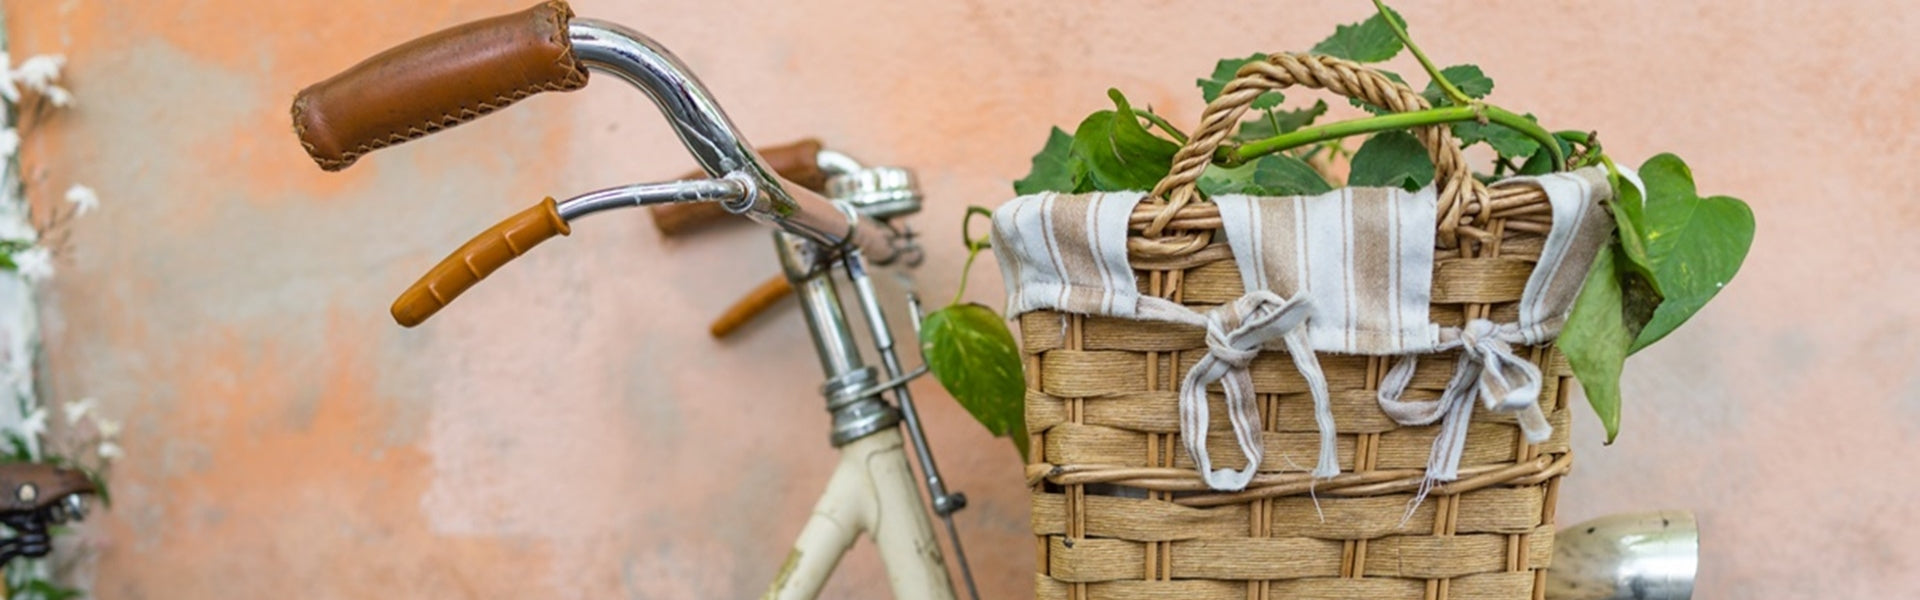 Bicycle Baskets | The Willow Basket